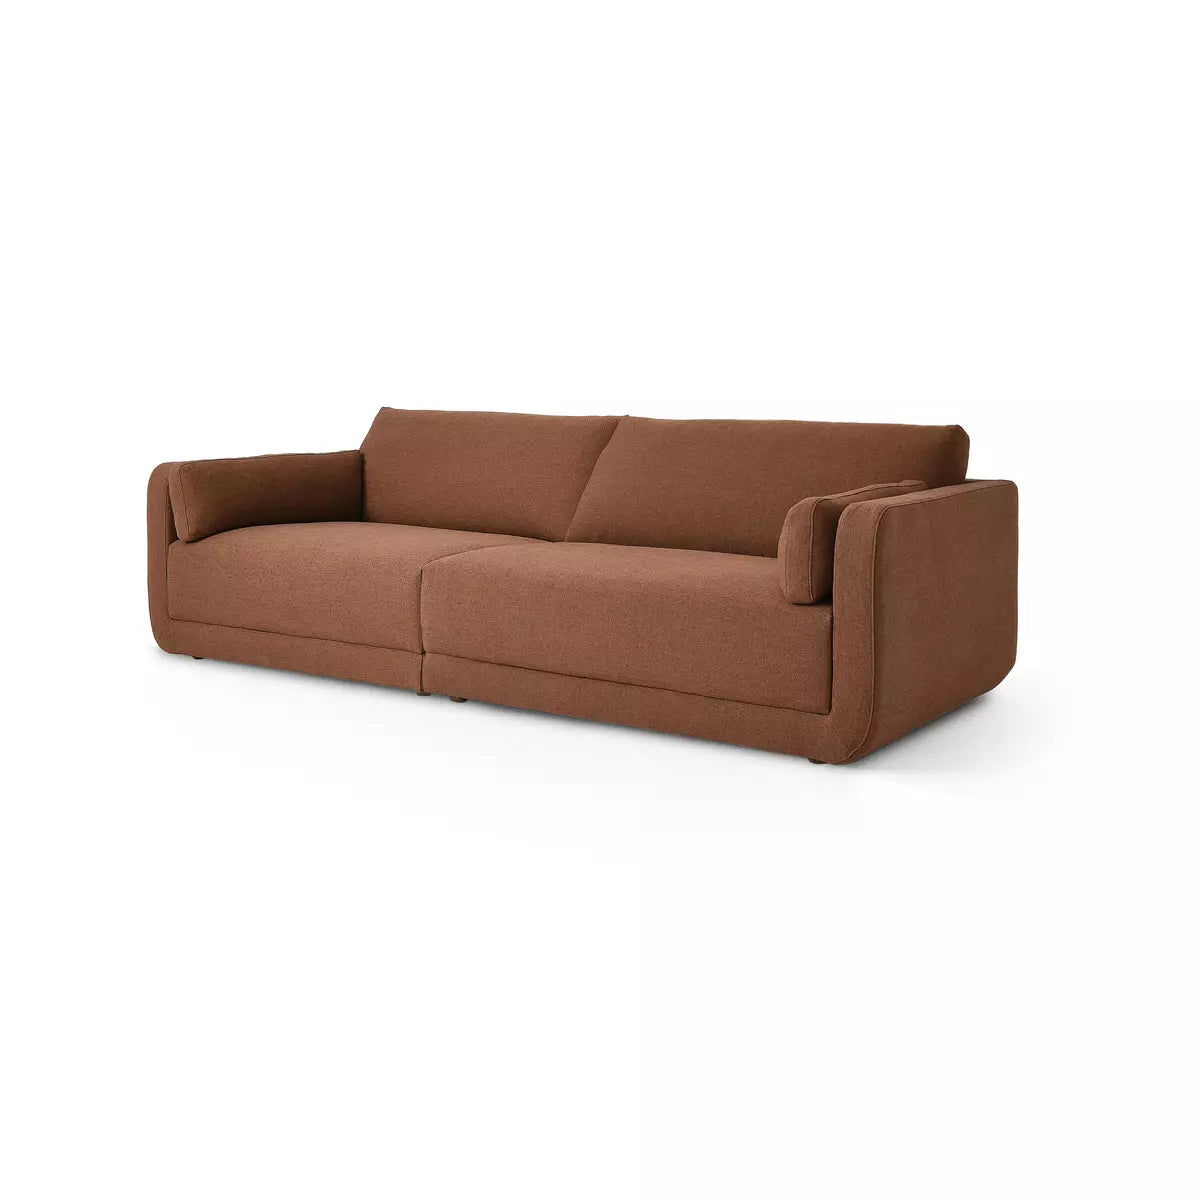 Toland 2 - Piece Sectional